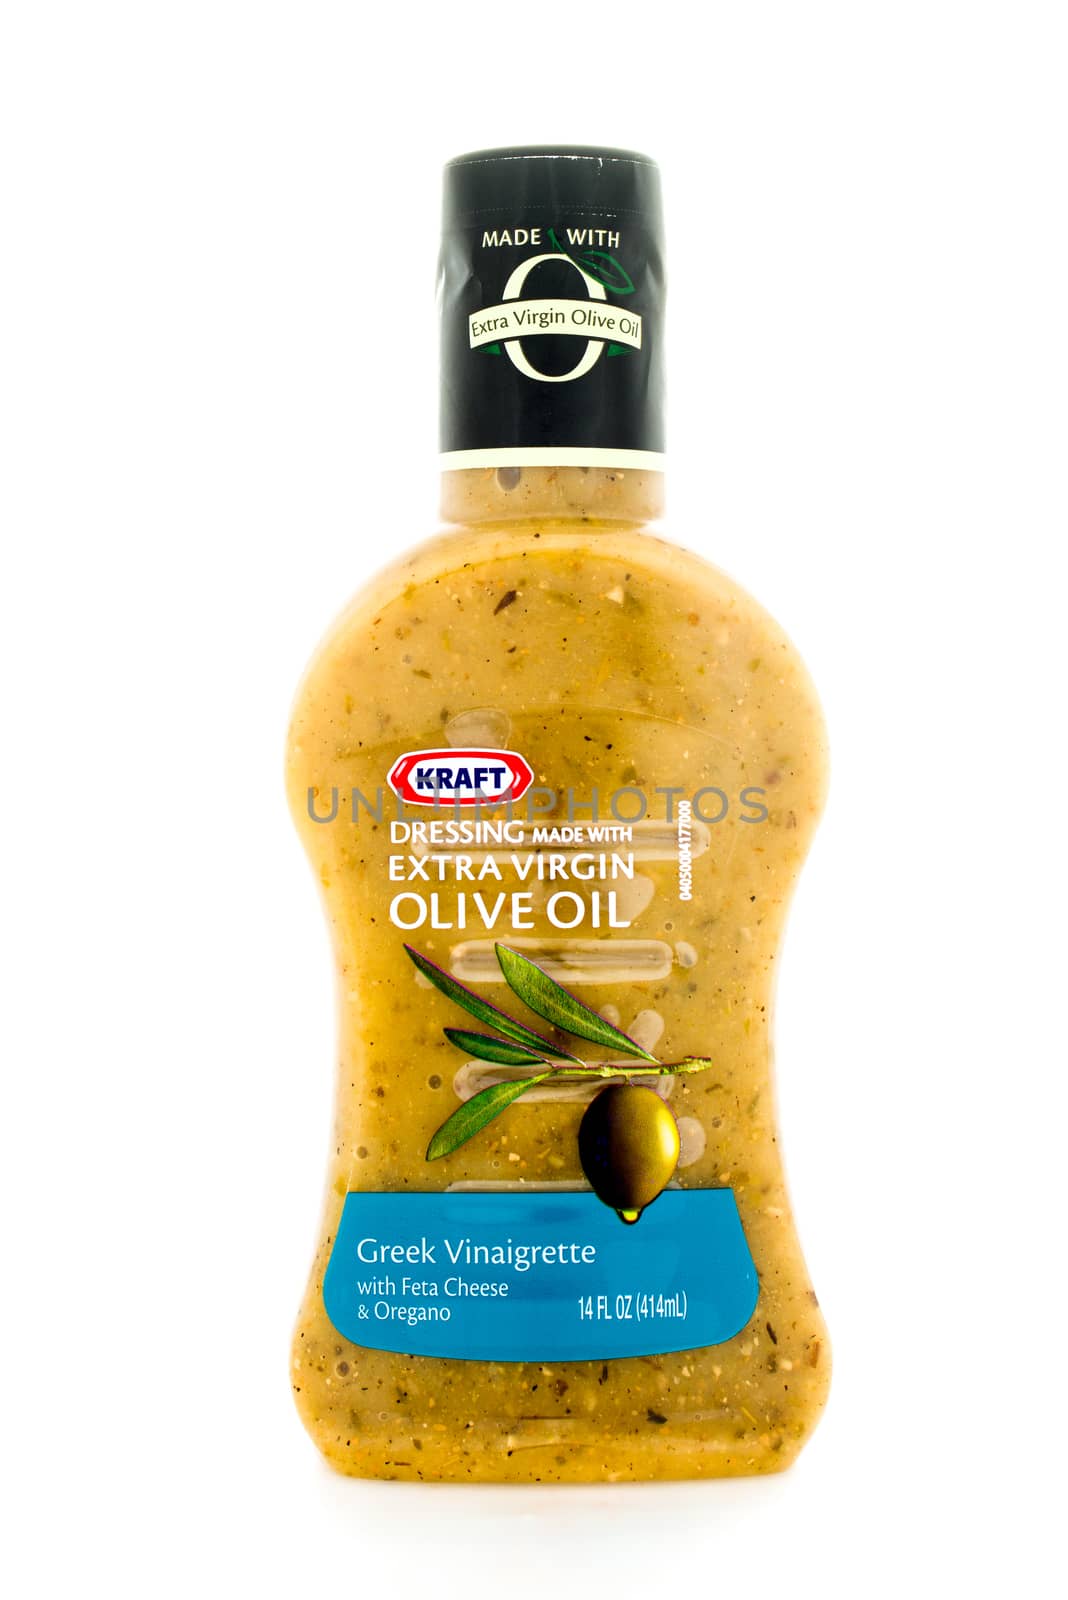 Winneconne, WI - 4 February 2015: Bottle of Kraft Extra Virgin Olive Oil salad dressing. Kraft was founded in 1903 and is located in